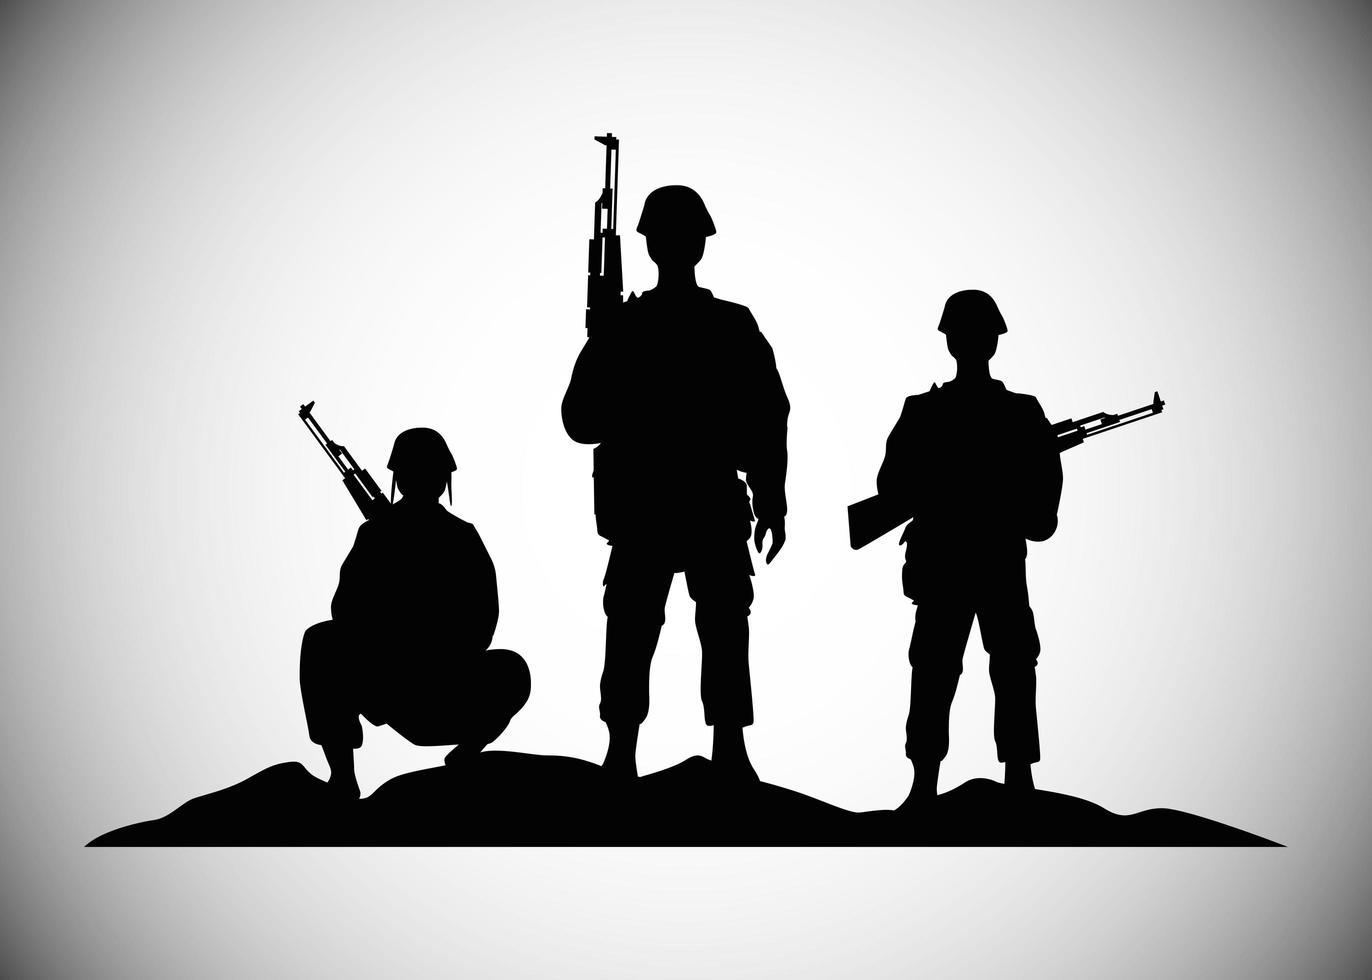 military soldiers with guns silhouettes figures icons vector